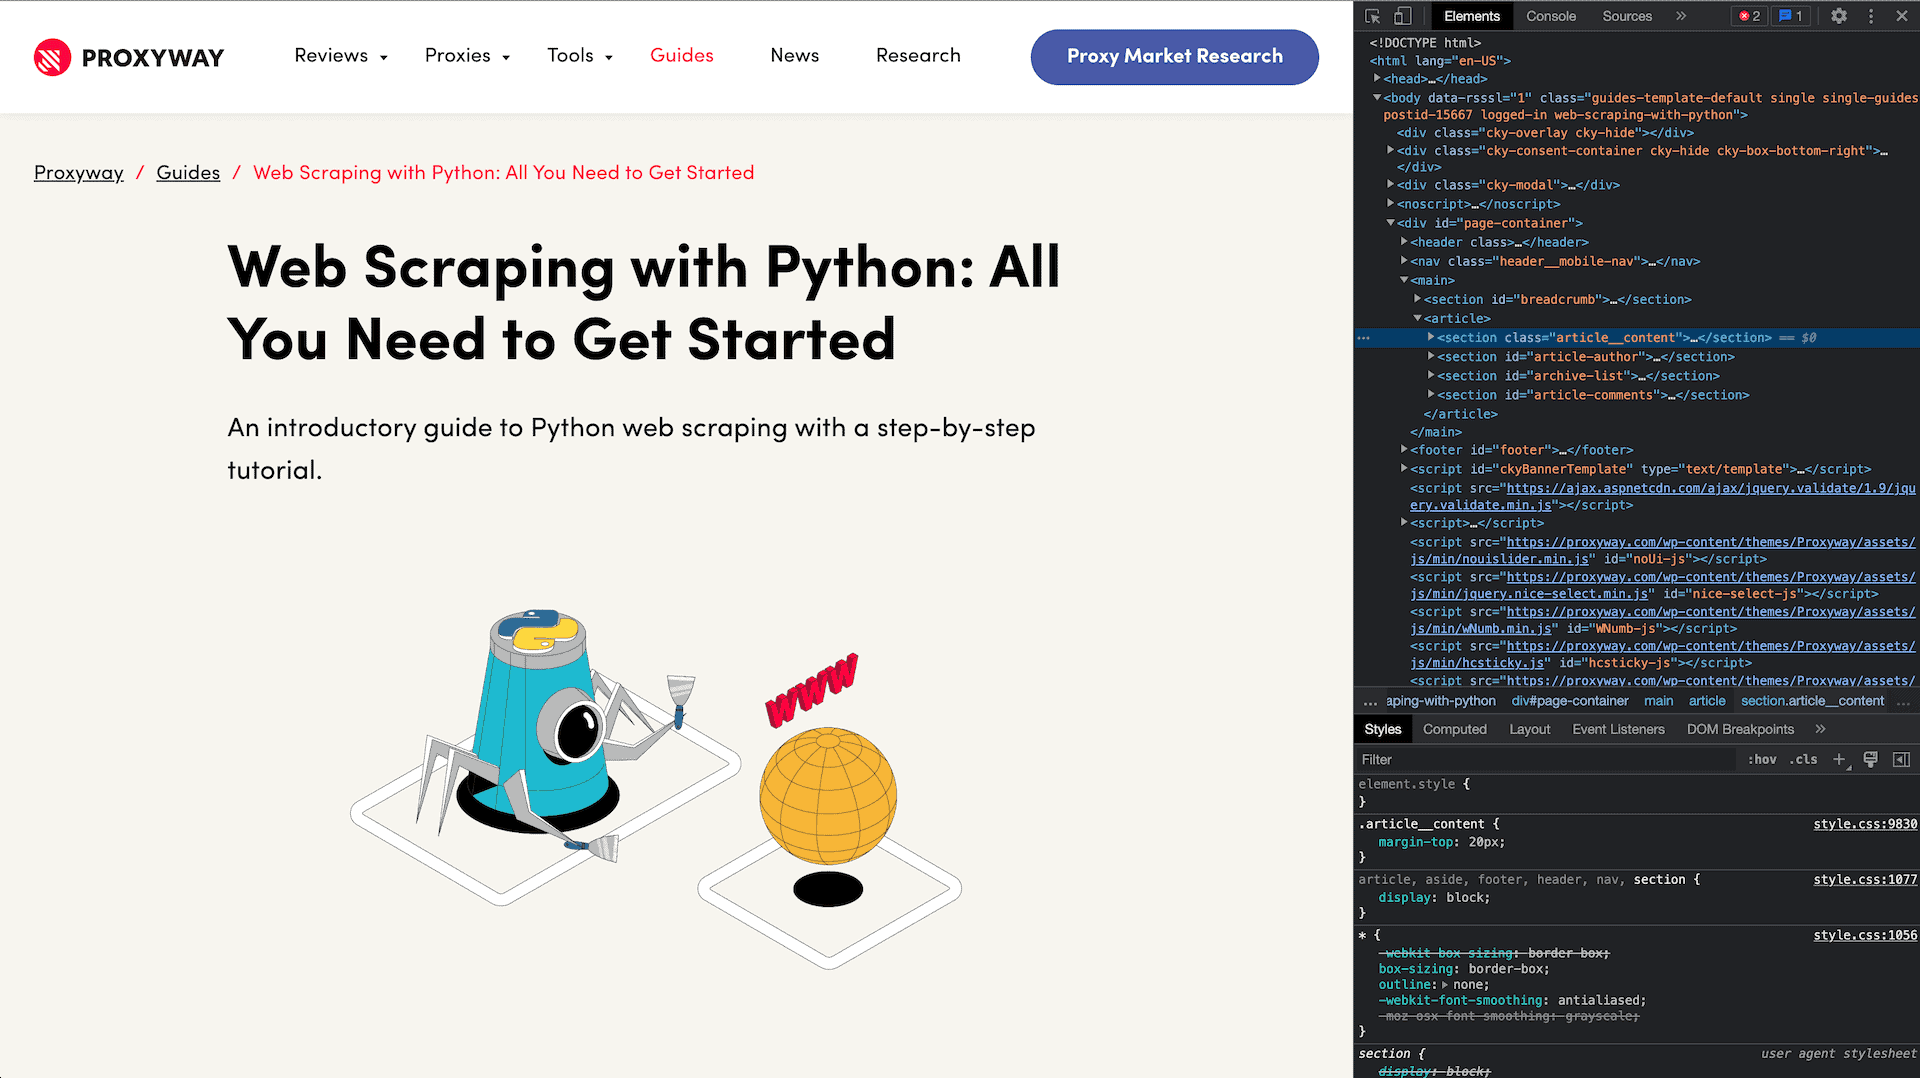 web scraping with python inspected